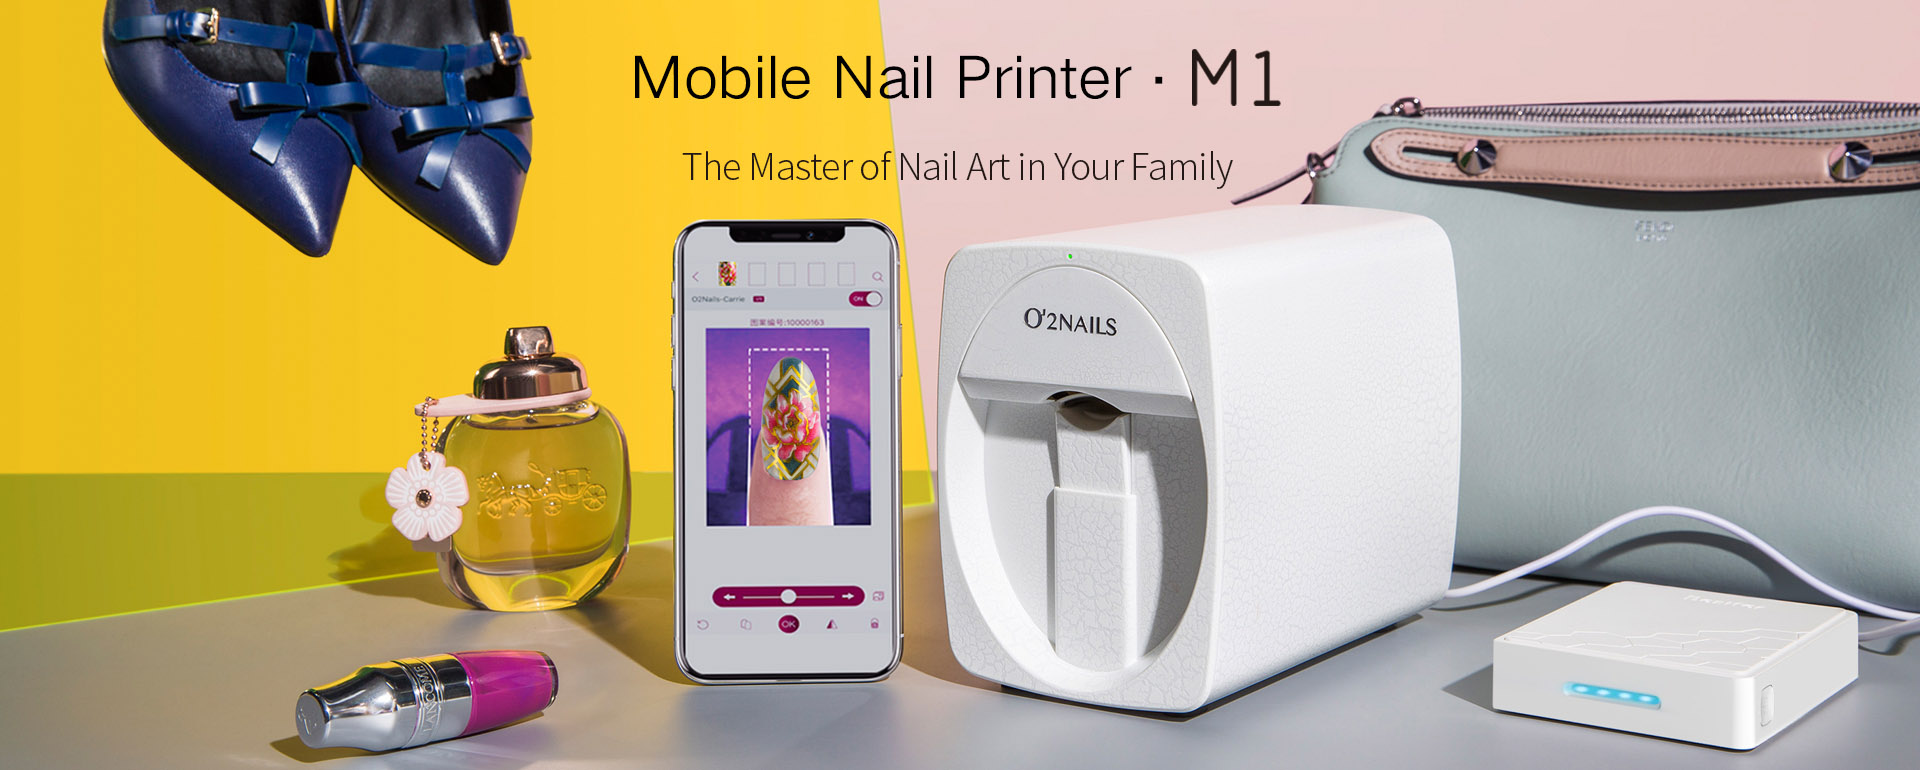 6. Compact Nail Art Printing Device - wide 8